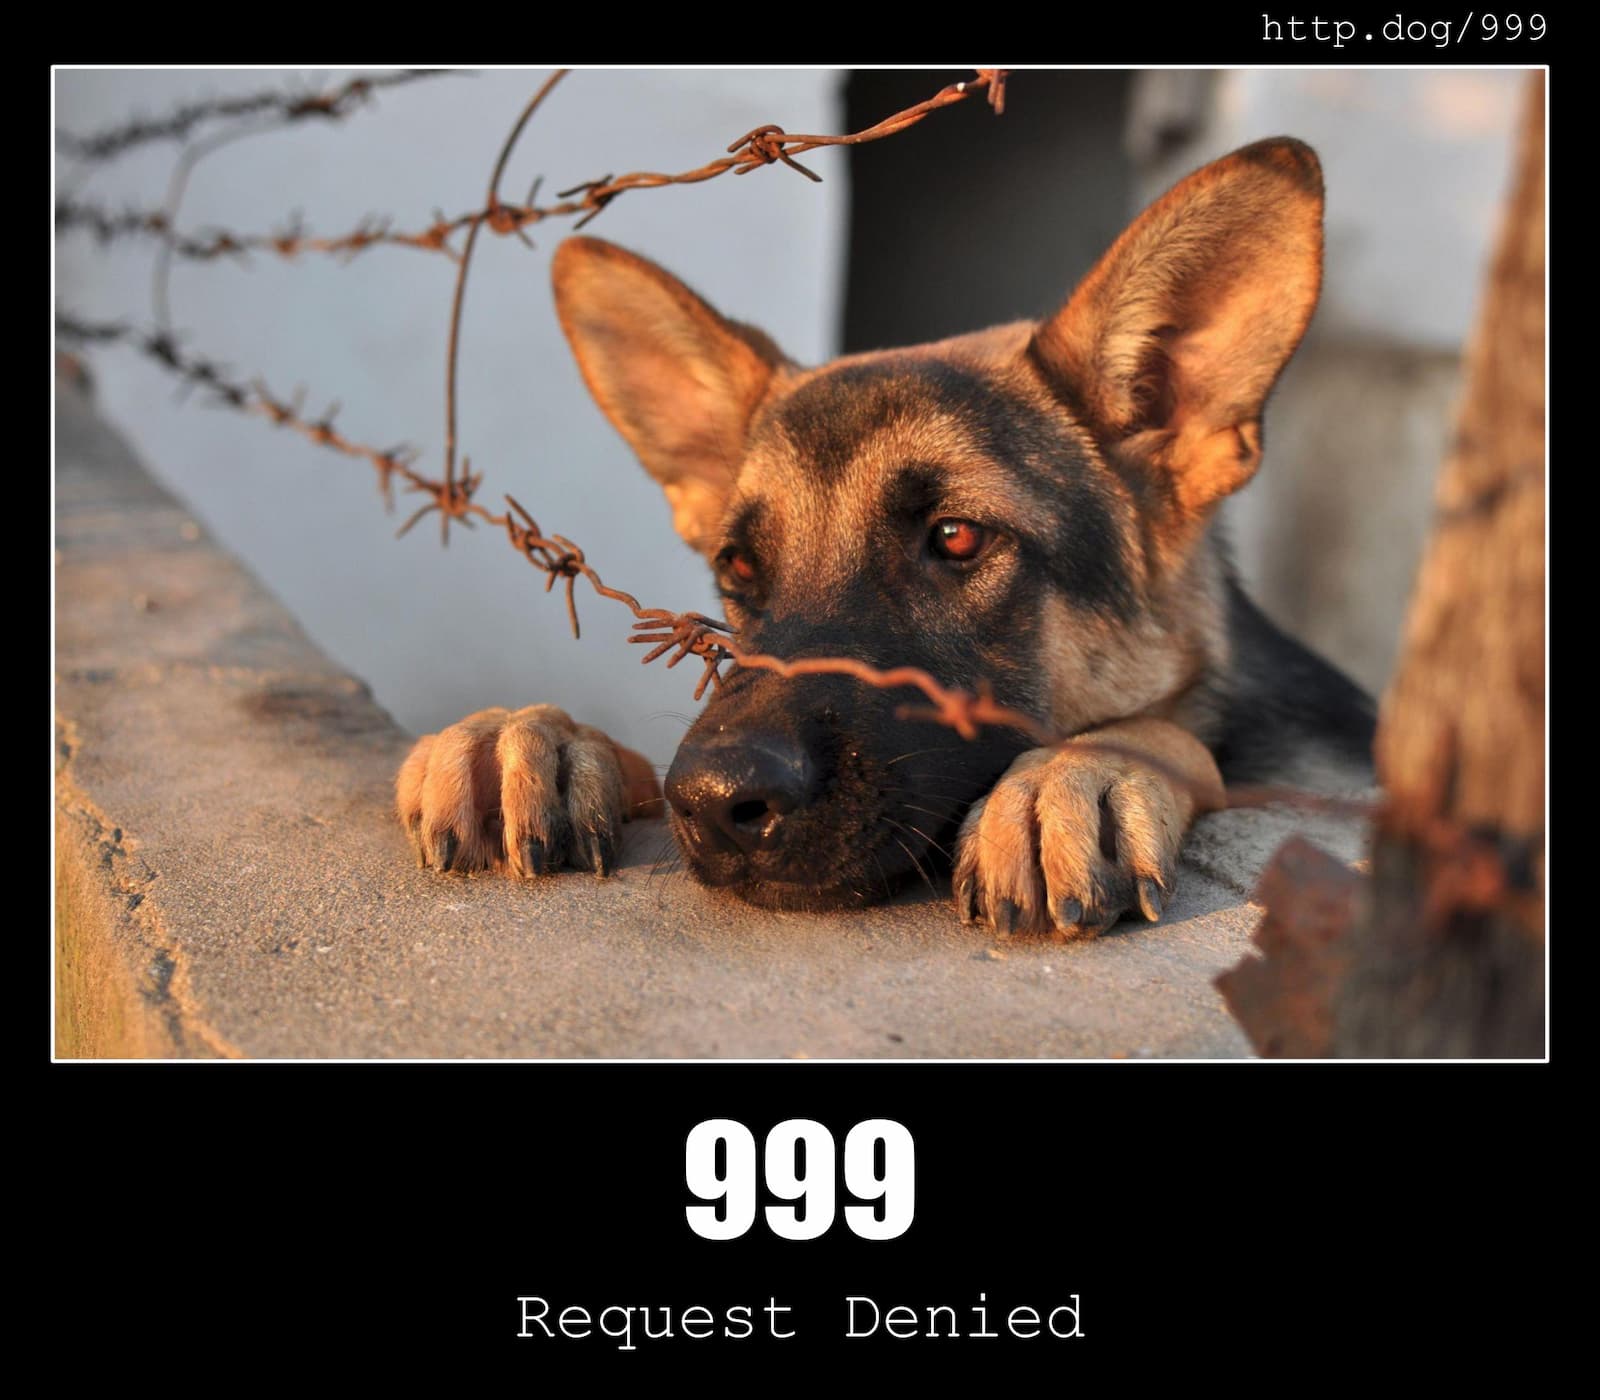 HTTP Status Code 999 Request Denied & Dogs